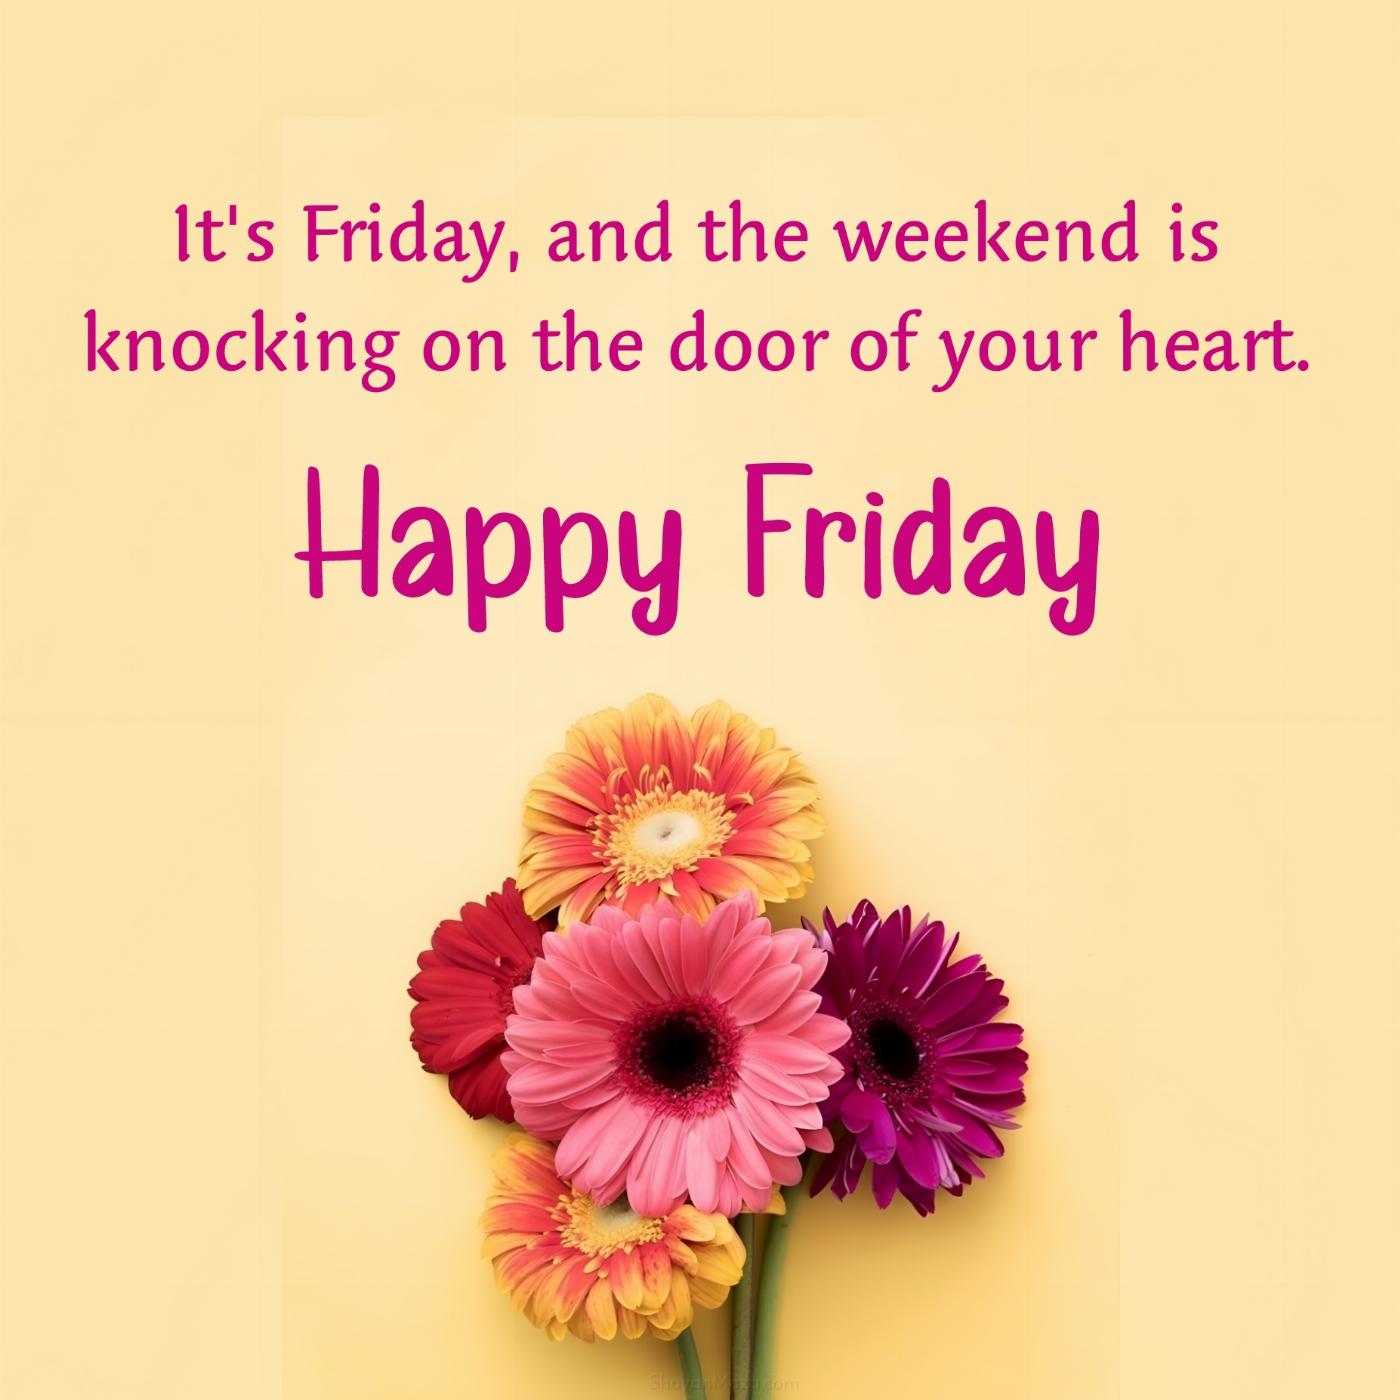 It's Friday and the weekend is knocking on the door of your heart